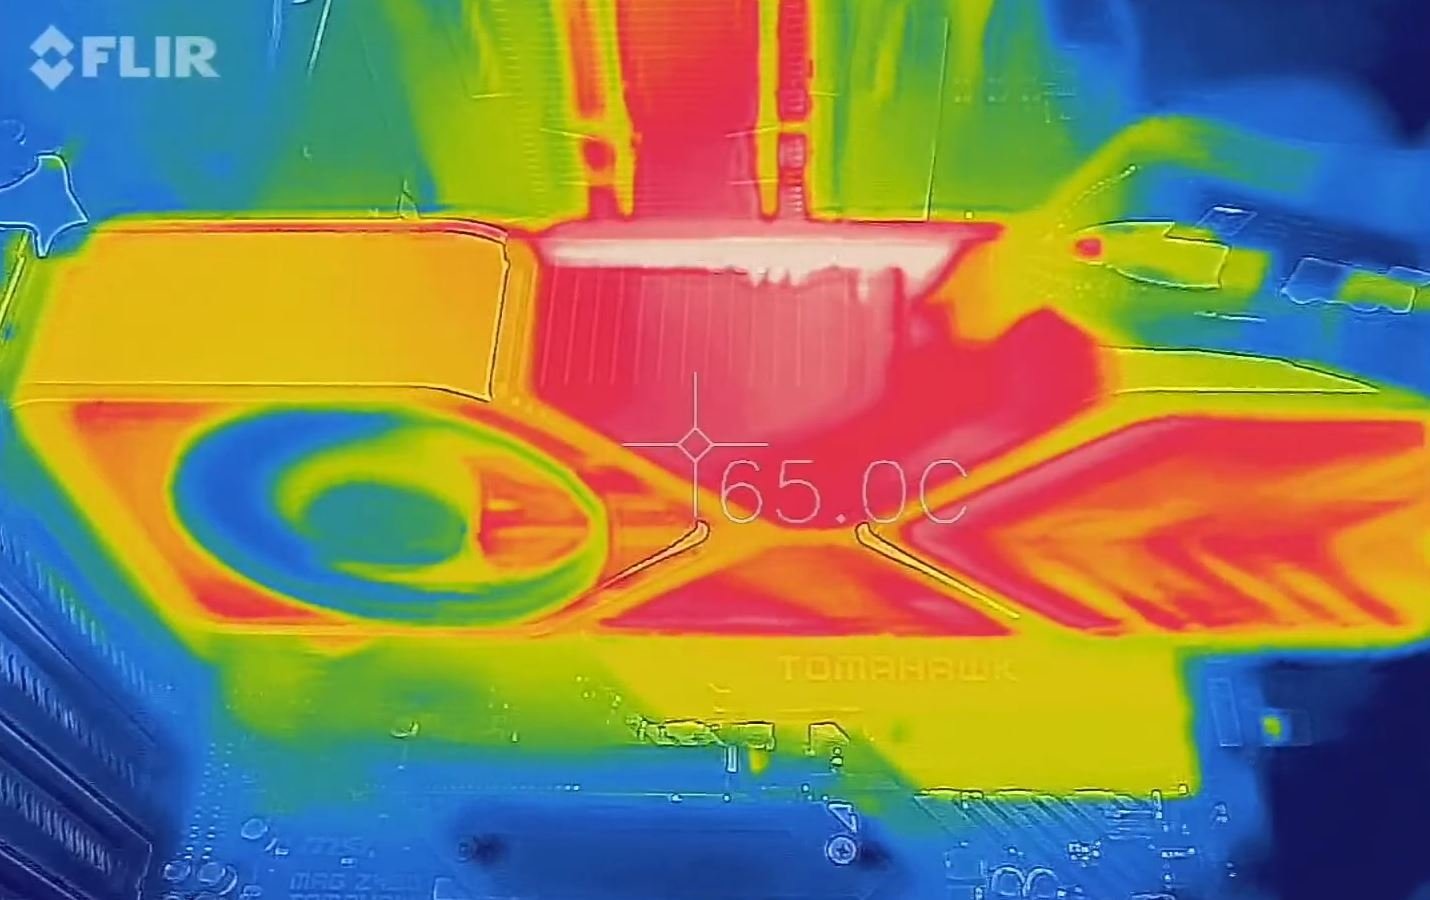 Here's the GeForce RTX 3080 Founders Edition under a thermal camera - TweakTown